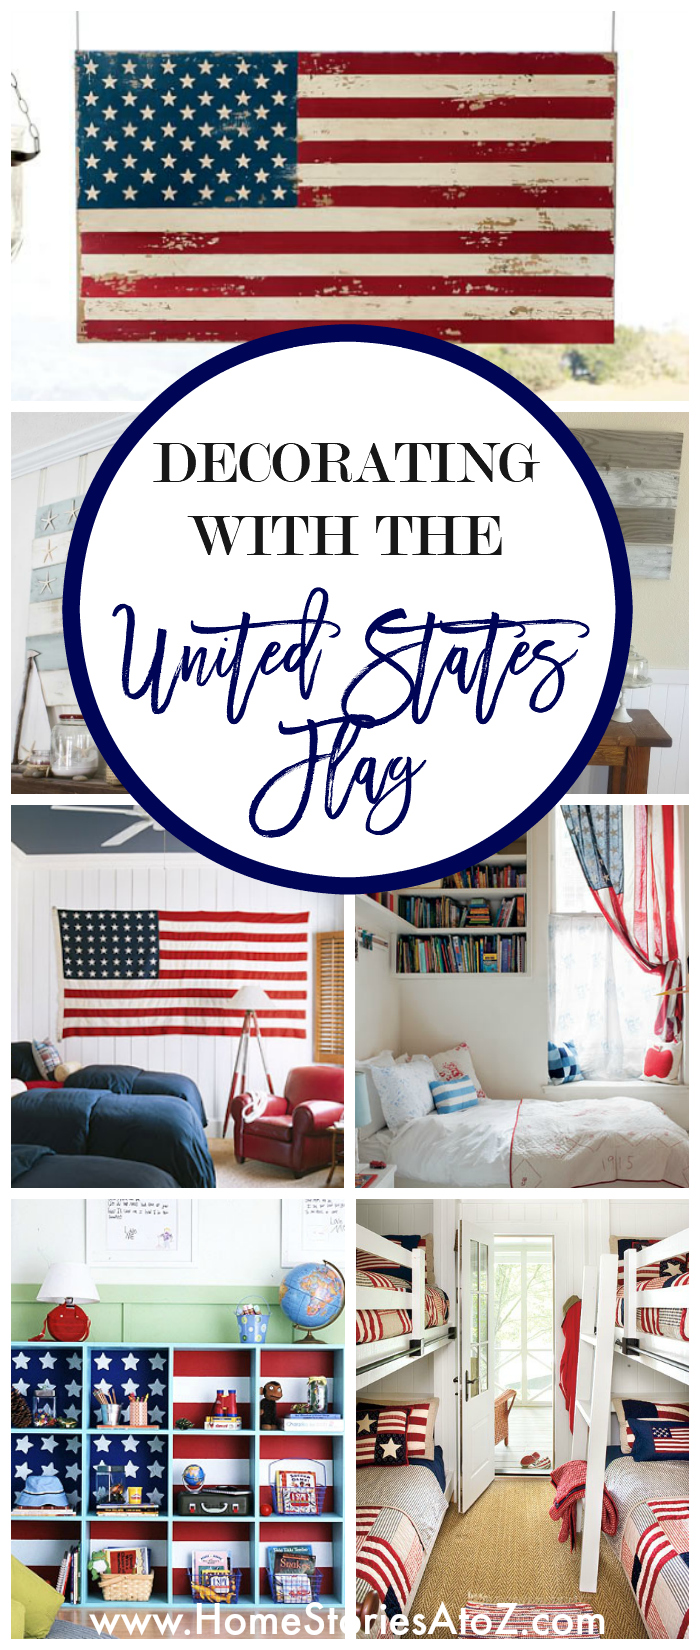 Decorating-with-the-United-States-Flag-